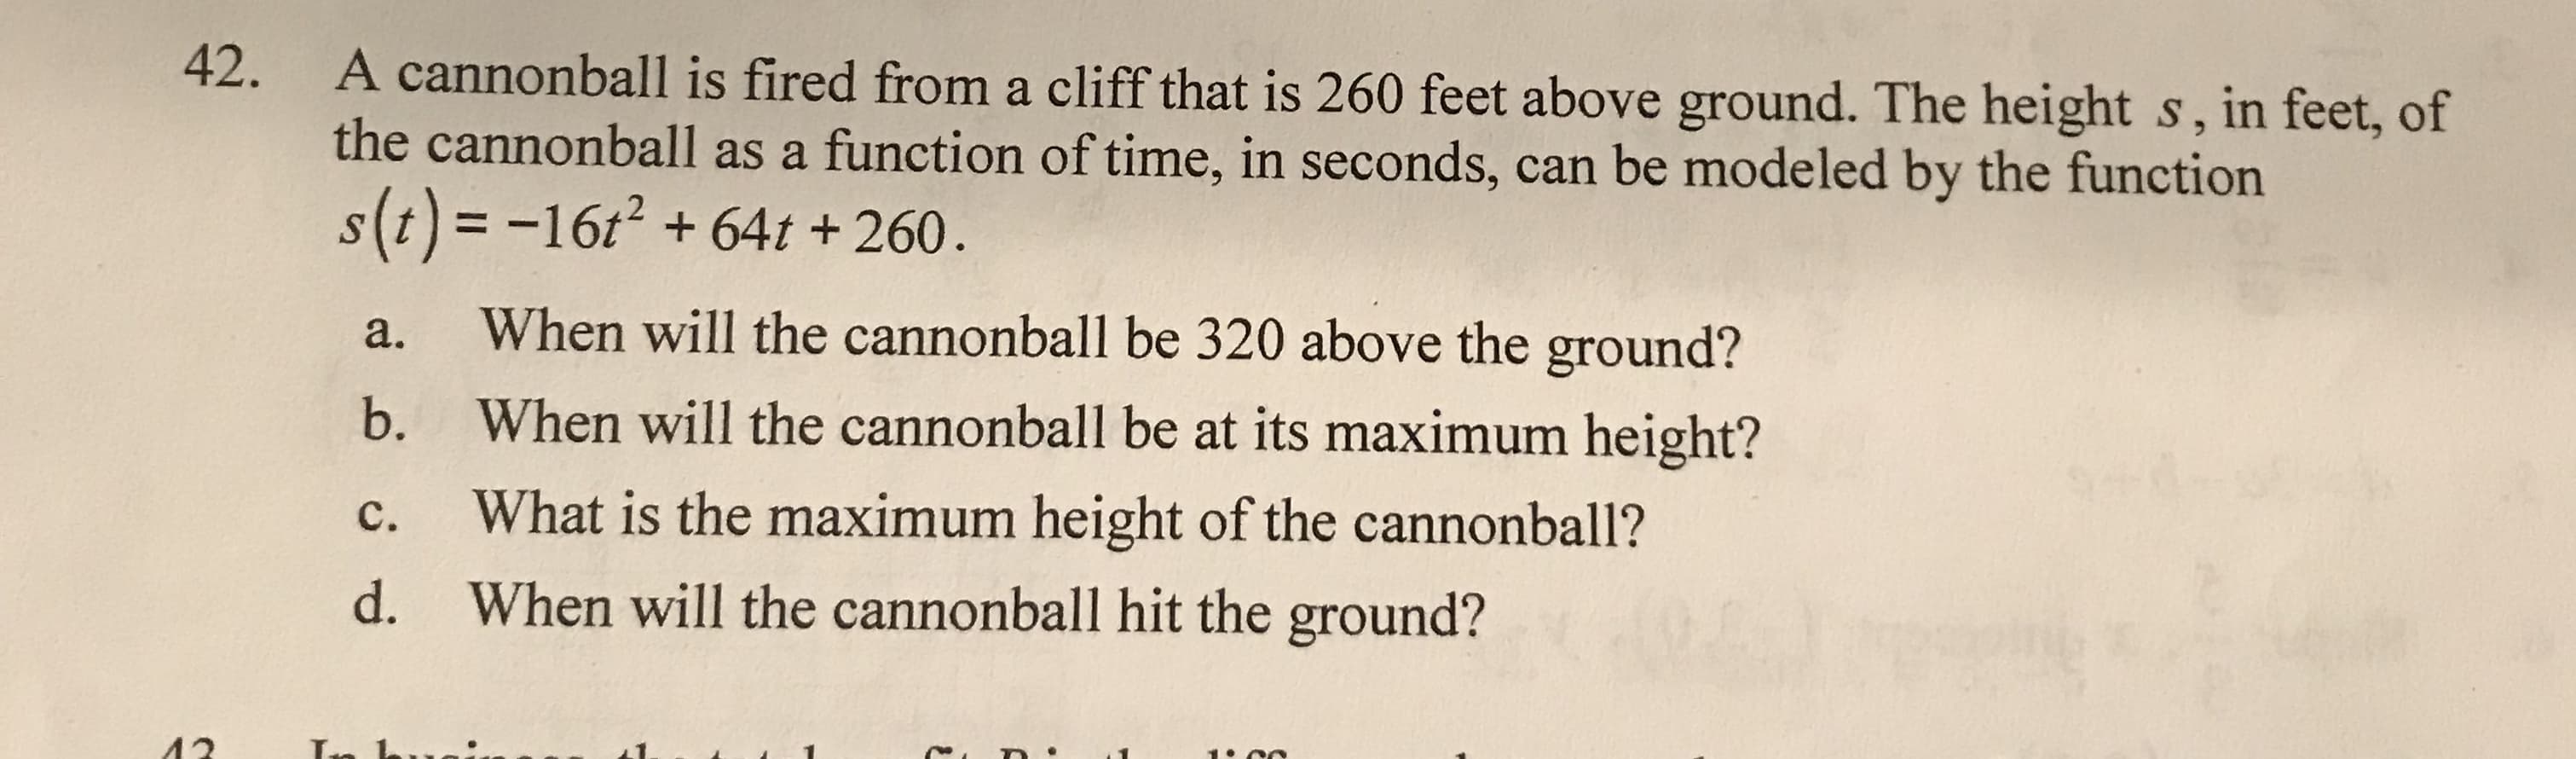 42.
A cannonball is fired from a cliff that is 260 feet above ground. The height s, in feet, of
the cannonball as a function of time, in seconds, can be modeled by the function
s(t) = -16t? + 64t + 260.
When will the cannonball be 320 above the ground?
a.
When will the cannonball be at its maximum height?
b.
What is the maximum height of the cannonball?
c.
When will the cannonball hit the ground?
d.
ла
